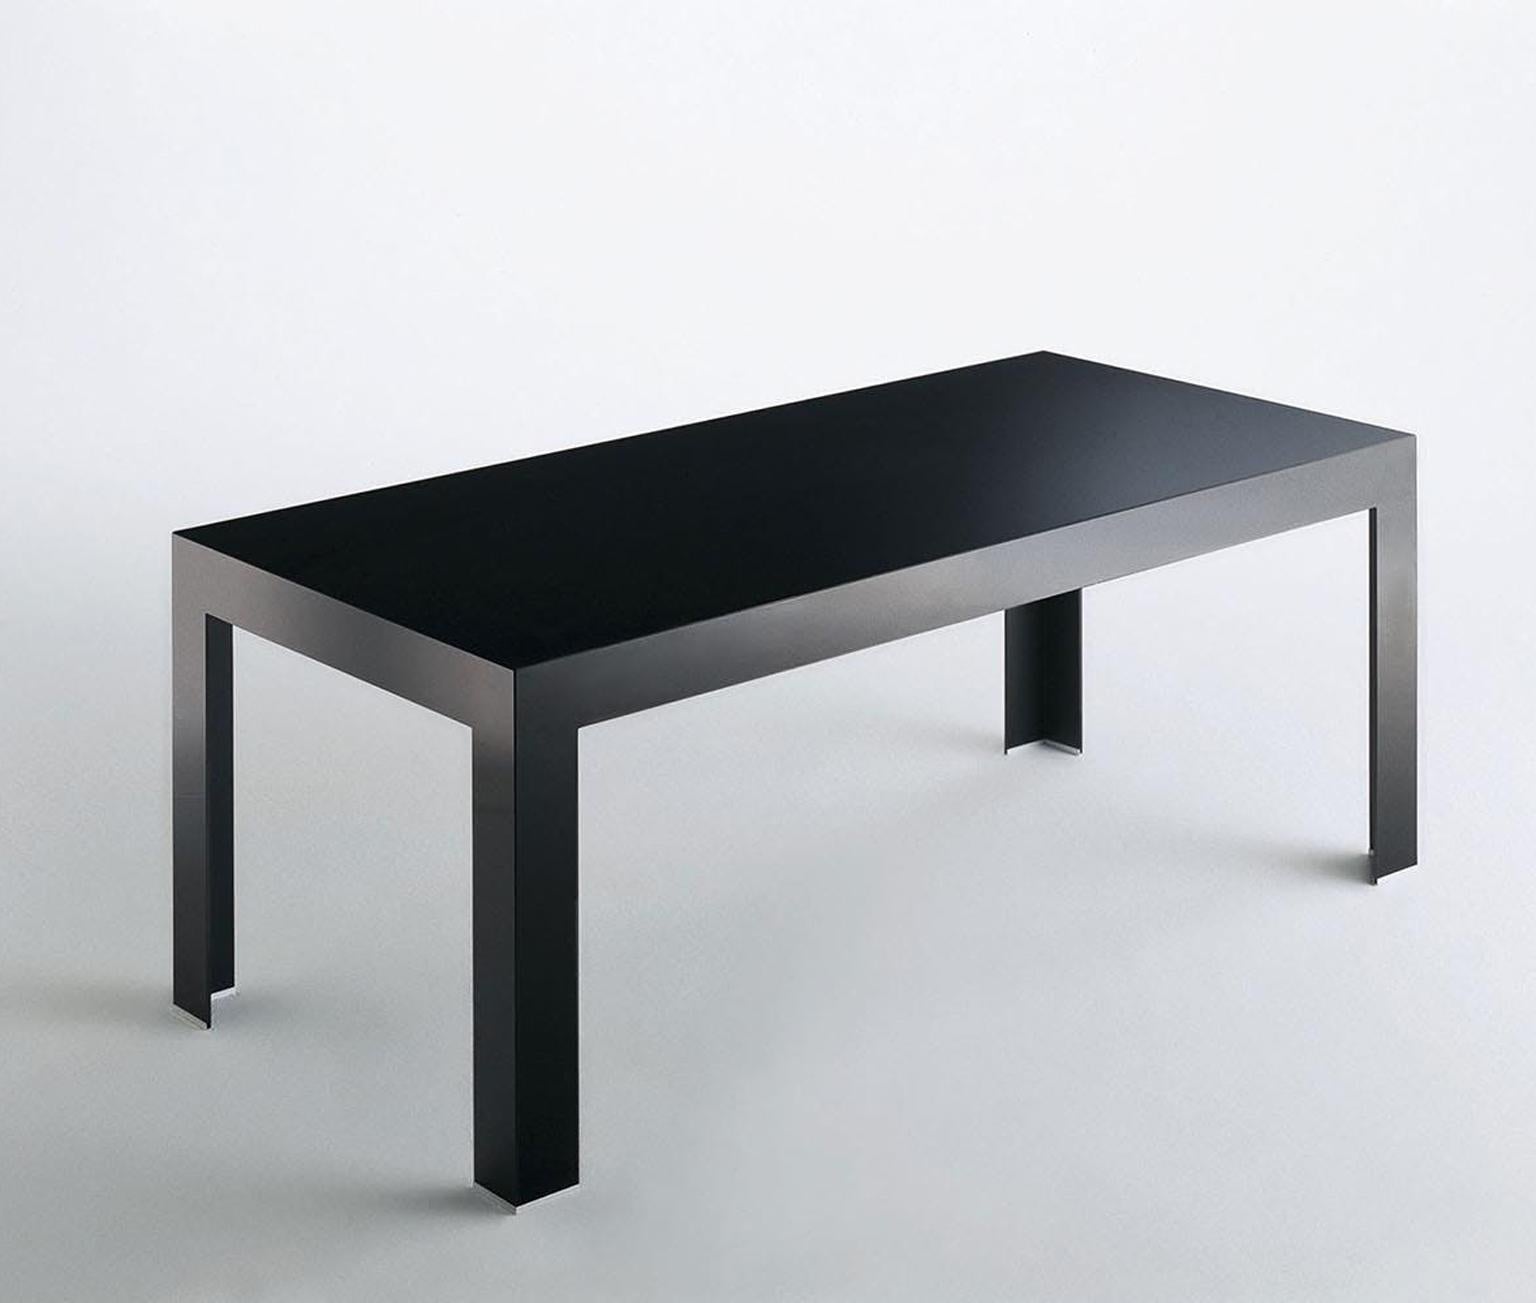 Italian contemporary design black glass dining table, fully made in Italy.

The principal features of this beautiful and very elegant table are: pureness of its shape, sobriety and sophisticated working techniques. The crystal panels are welded with